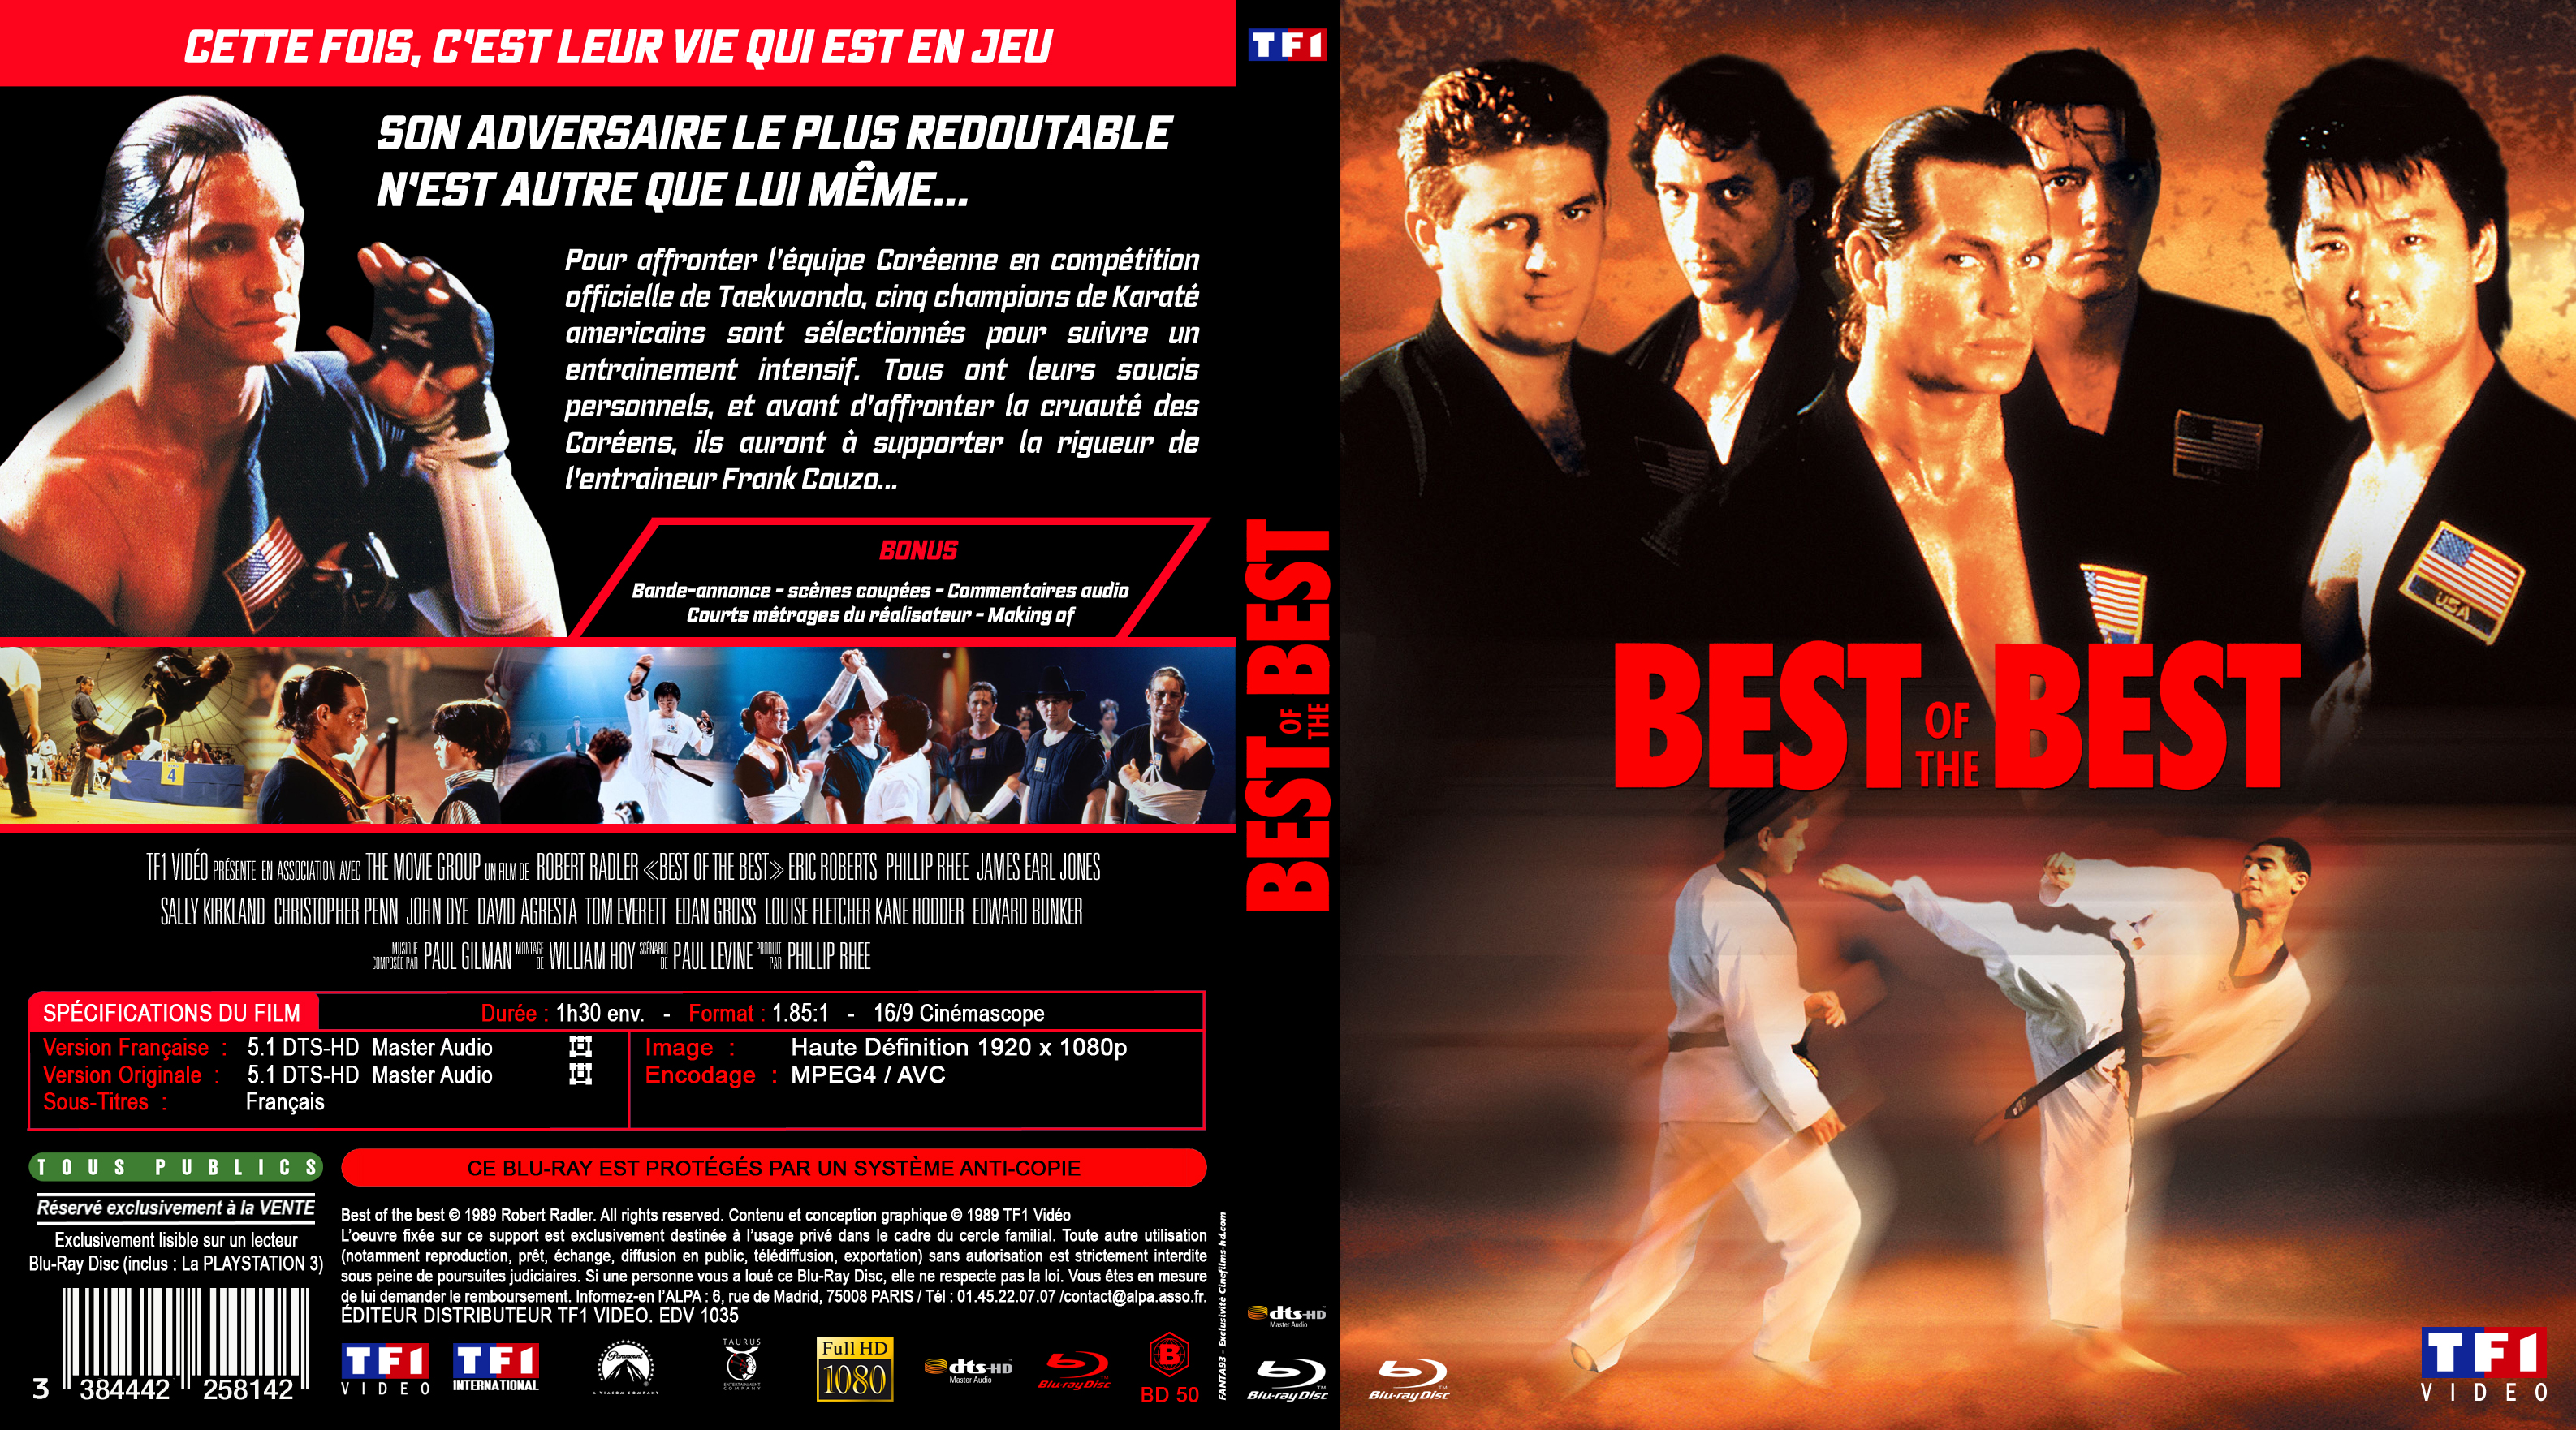 Jaquette DVD Best of the best custom (BLU-RAY)